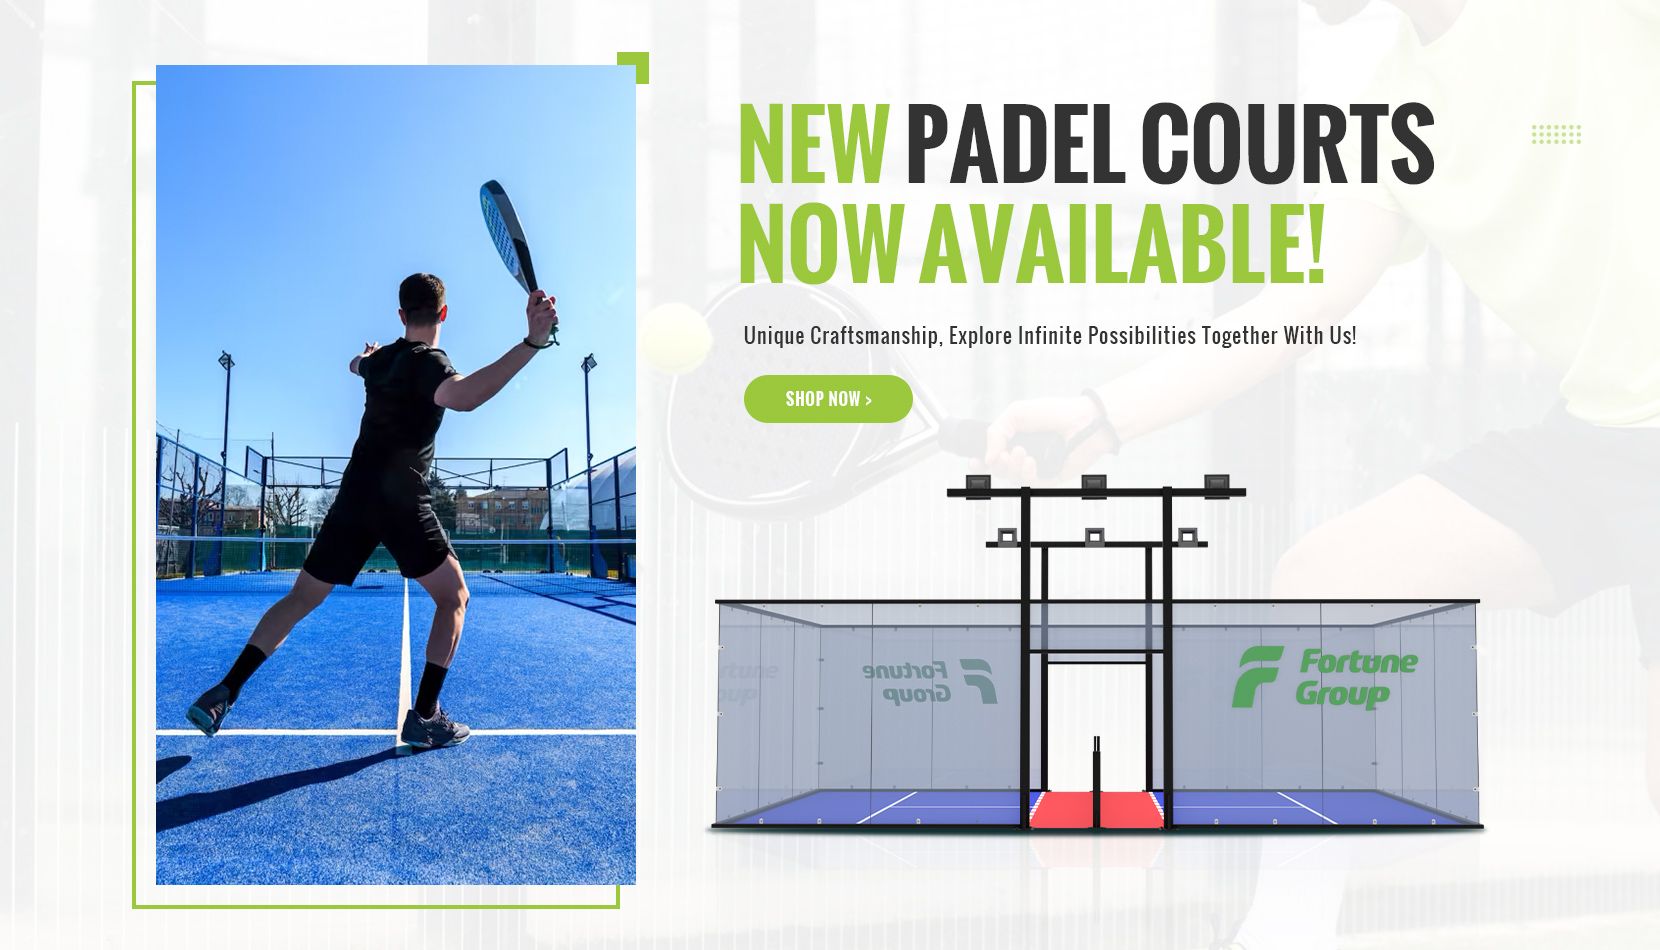 NEW PADEL COURTSNOW AVAILABLE!